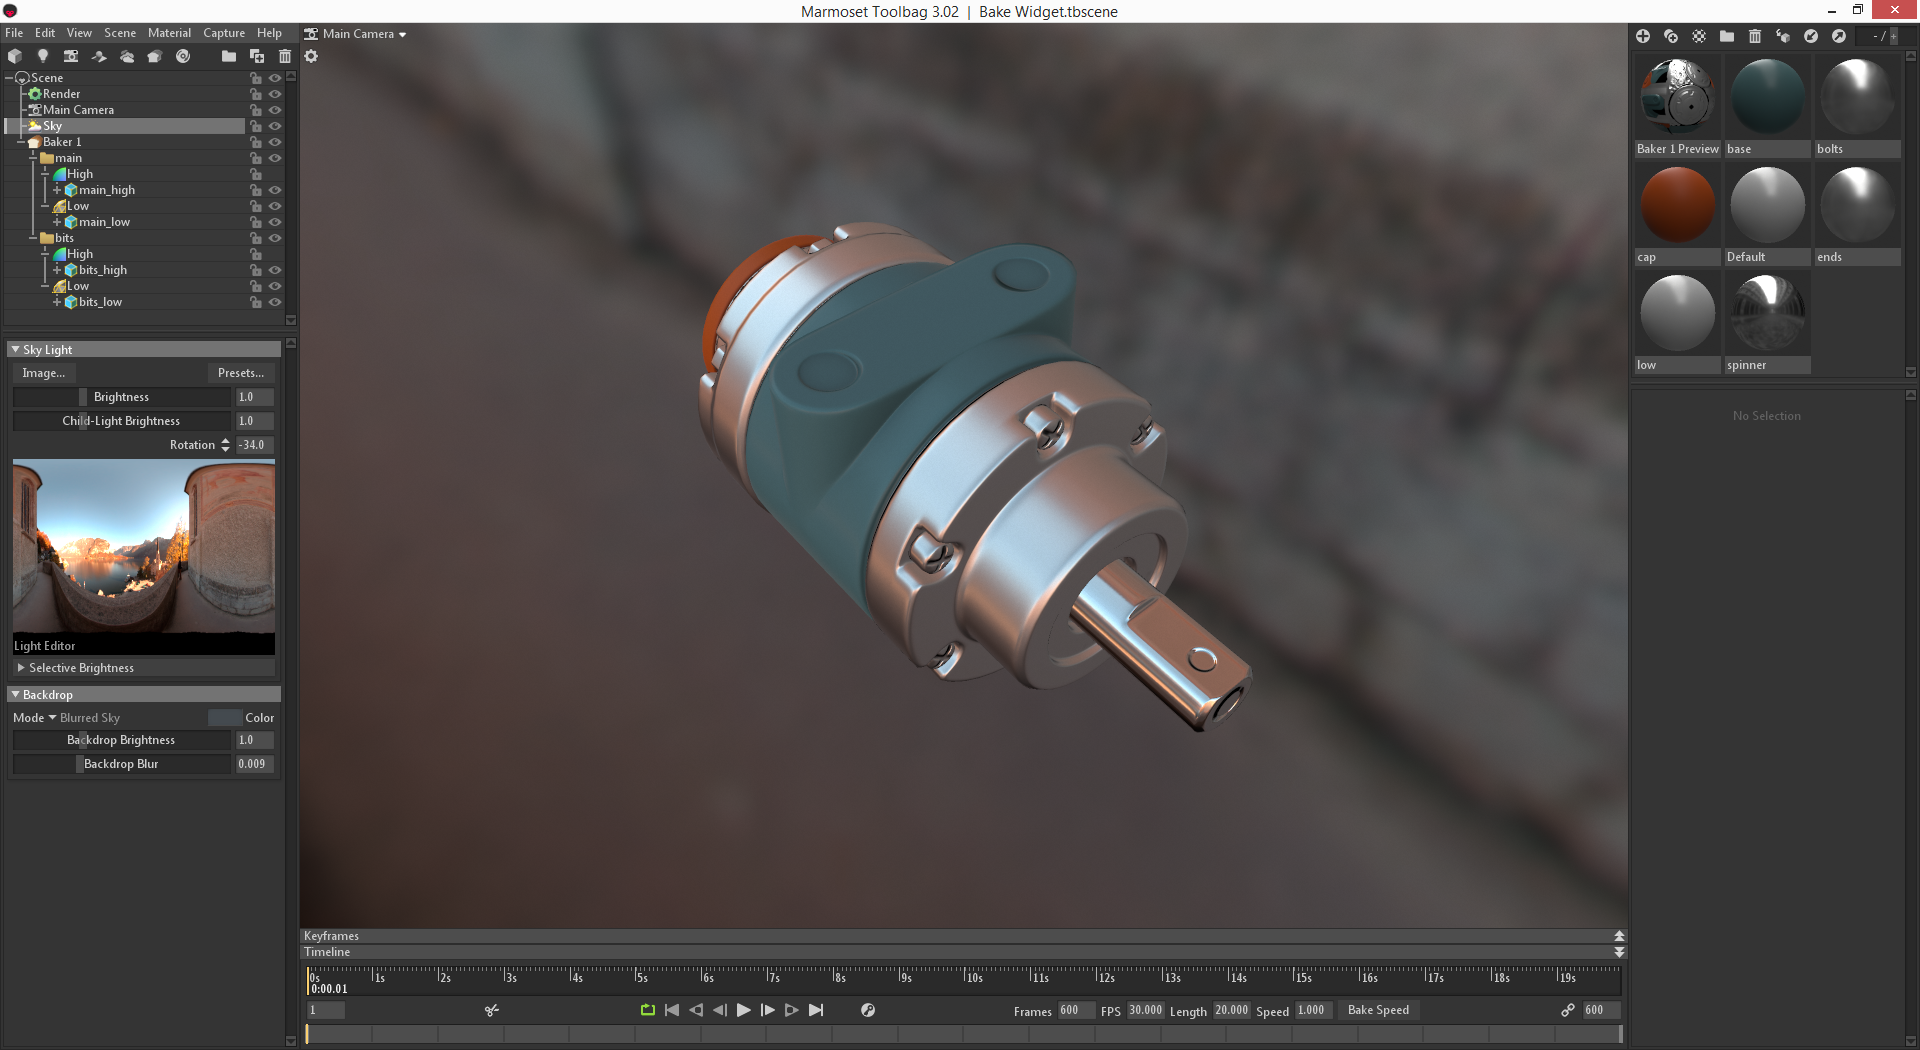 Marmoset Toolbag 4.0.6.3 instal the new for ios